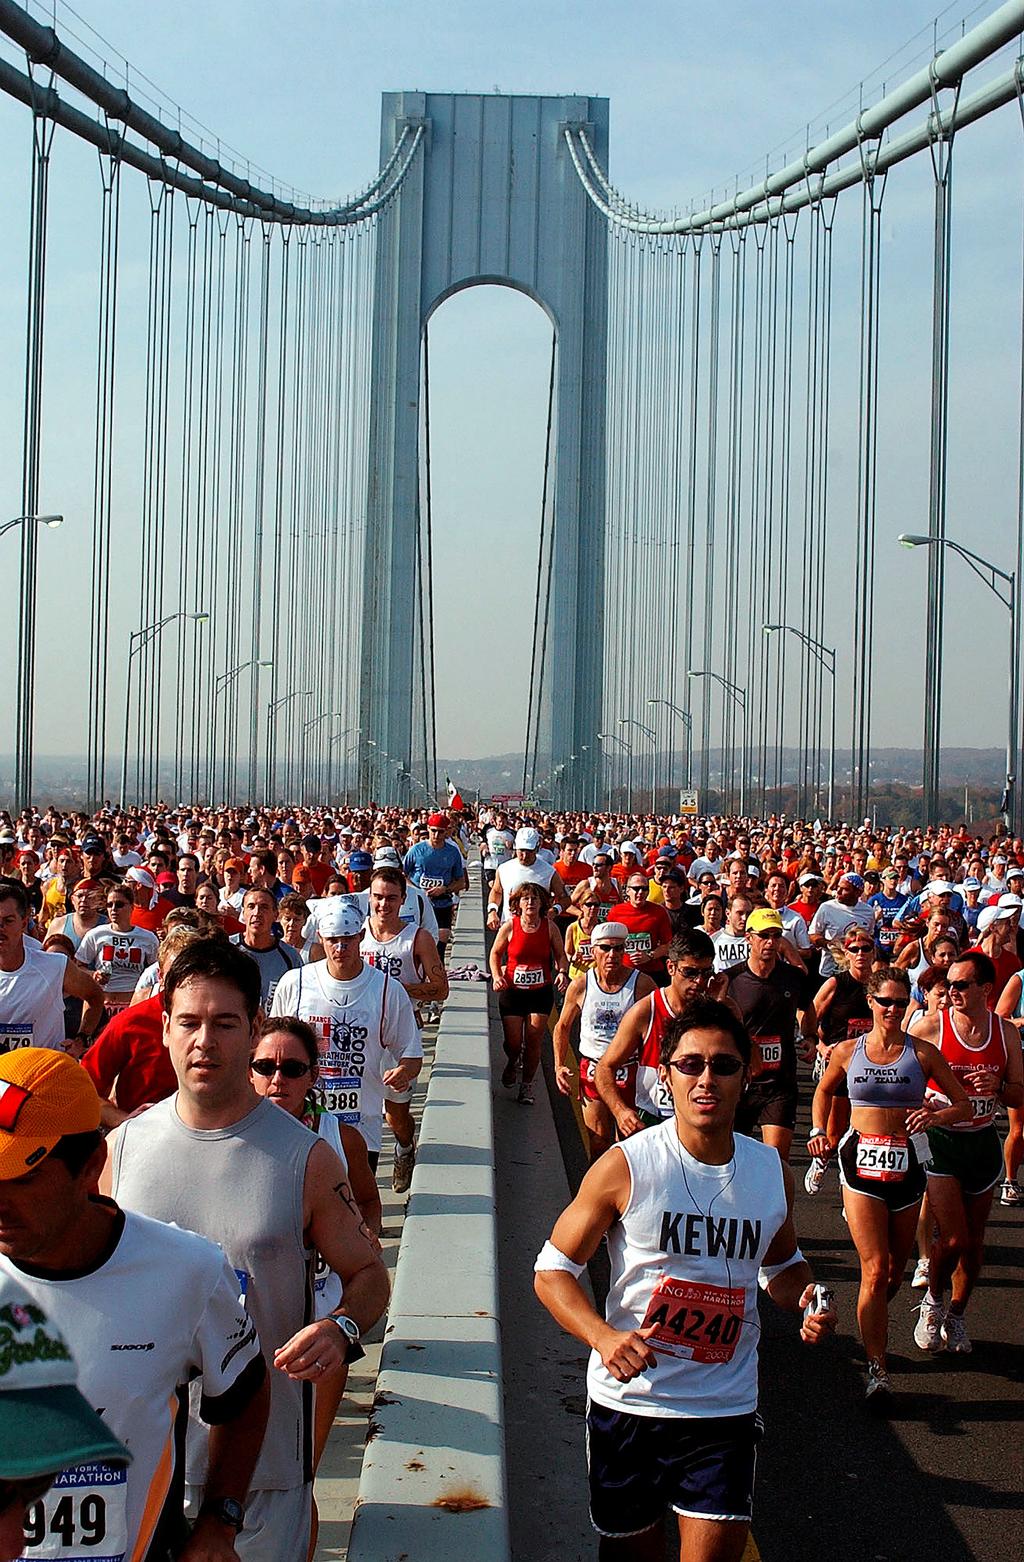 Throughout its history, the marathon has symbolized the triumph of the human spirit & individual achievement.